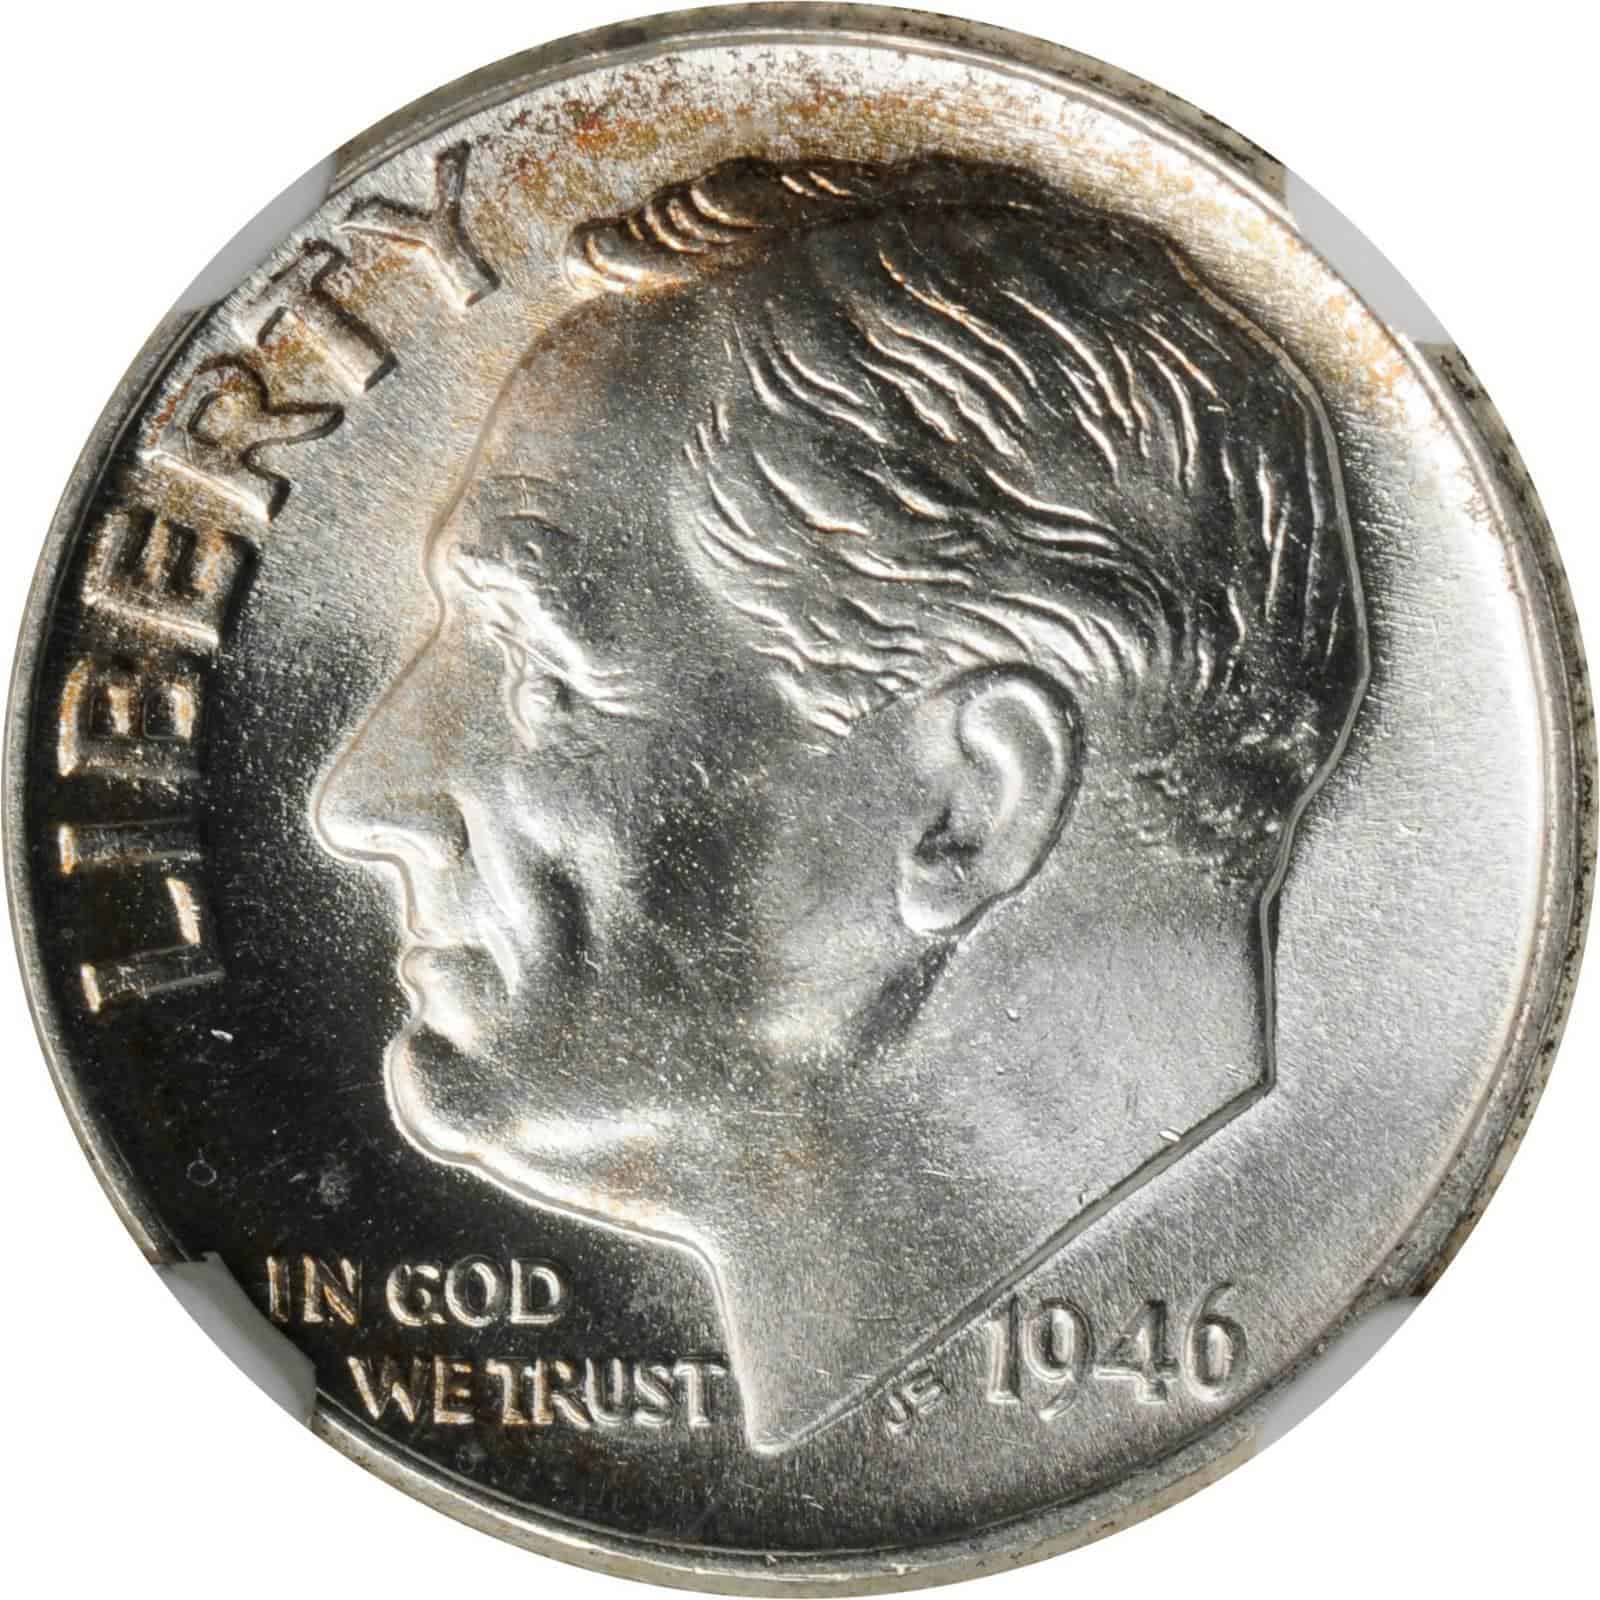 The Obverse of the 1946 Dime